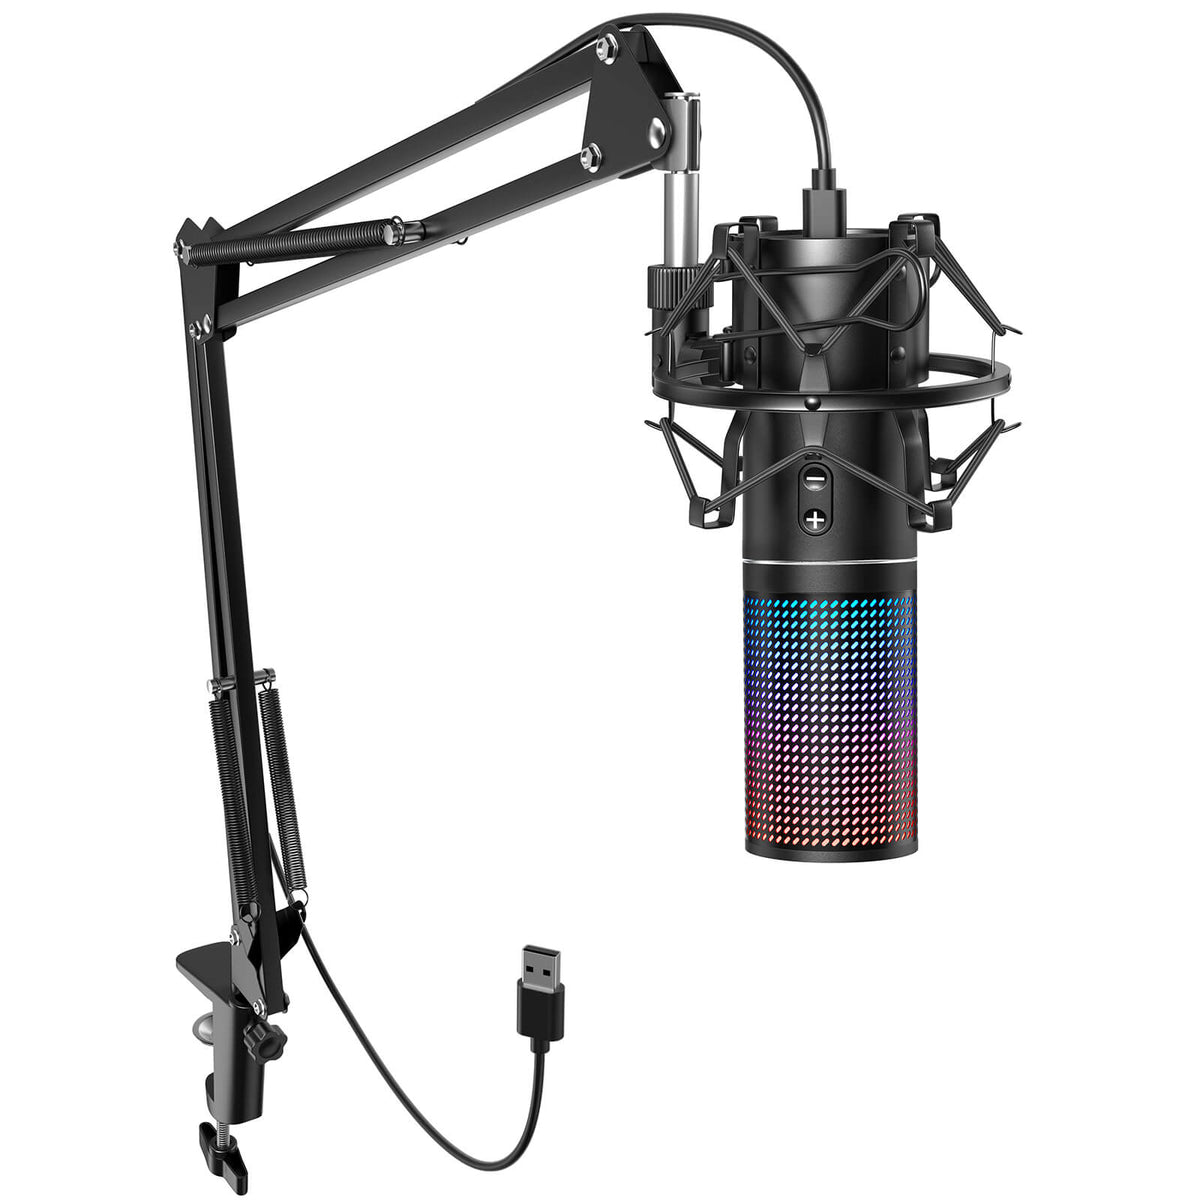 Tonor Orca 001 Microphone Review